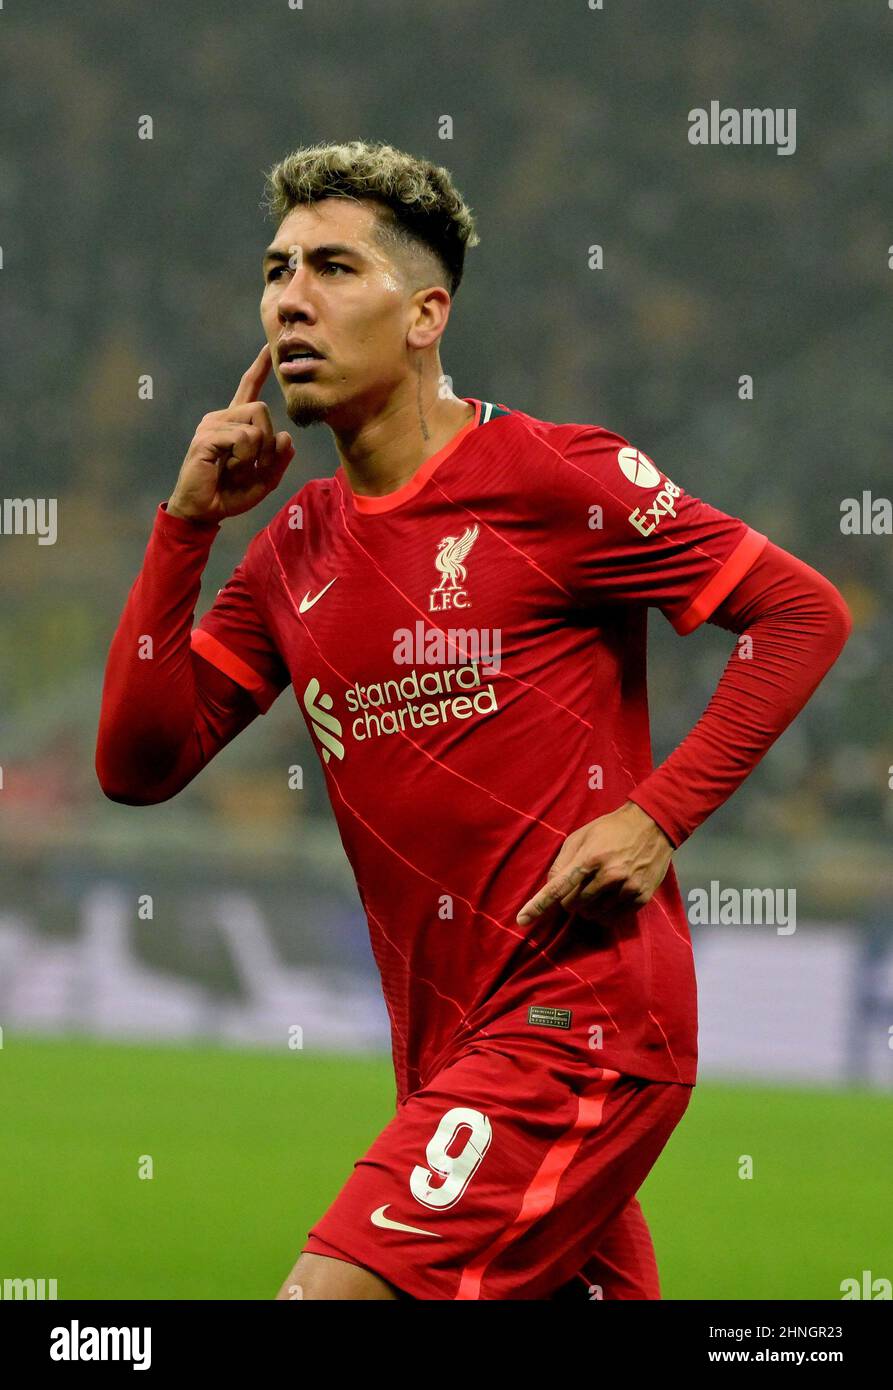 Milan. 16th Feb, 2022. Liverpool's Roberto Firmino celebrates his goal  during UEFA Champions League round of 16 first leg match between FC Inter  and Liverpool in Milan, Italy, Feb.16, 2022. Credit: Alberto